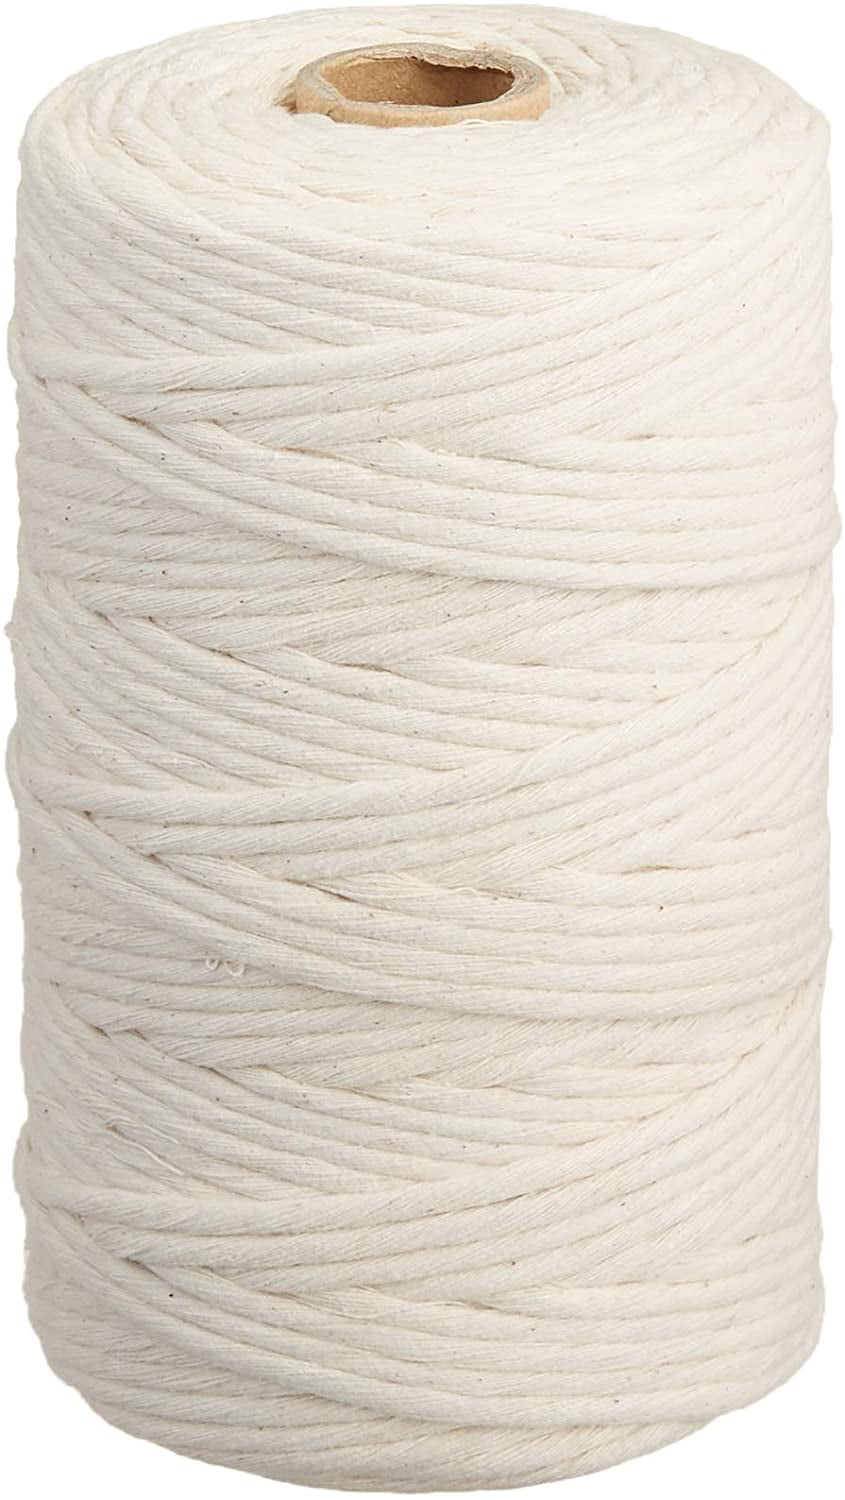 Home Bedroom Living Room Decorations GoMaihe Macrame Cord 3mm x 656 ft 4-Strand Twisted Soft Unstained Cotton Rope for Plant Hanger Wall Hanging Knitting Craft Beginners Beige 